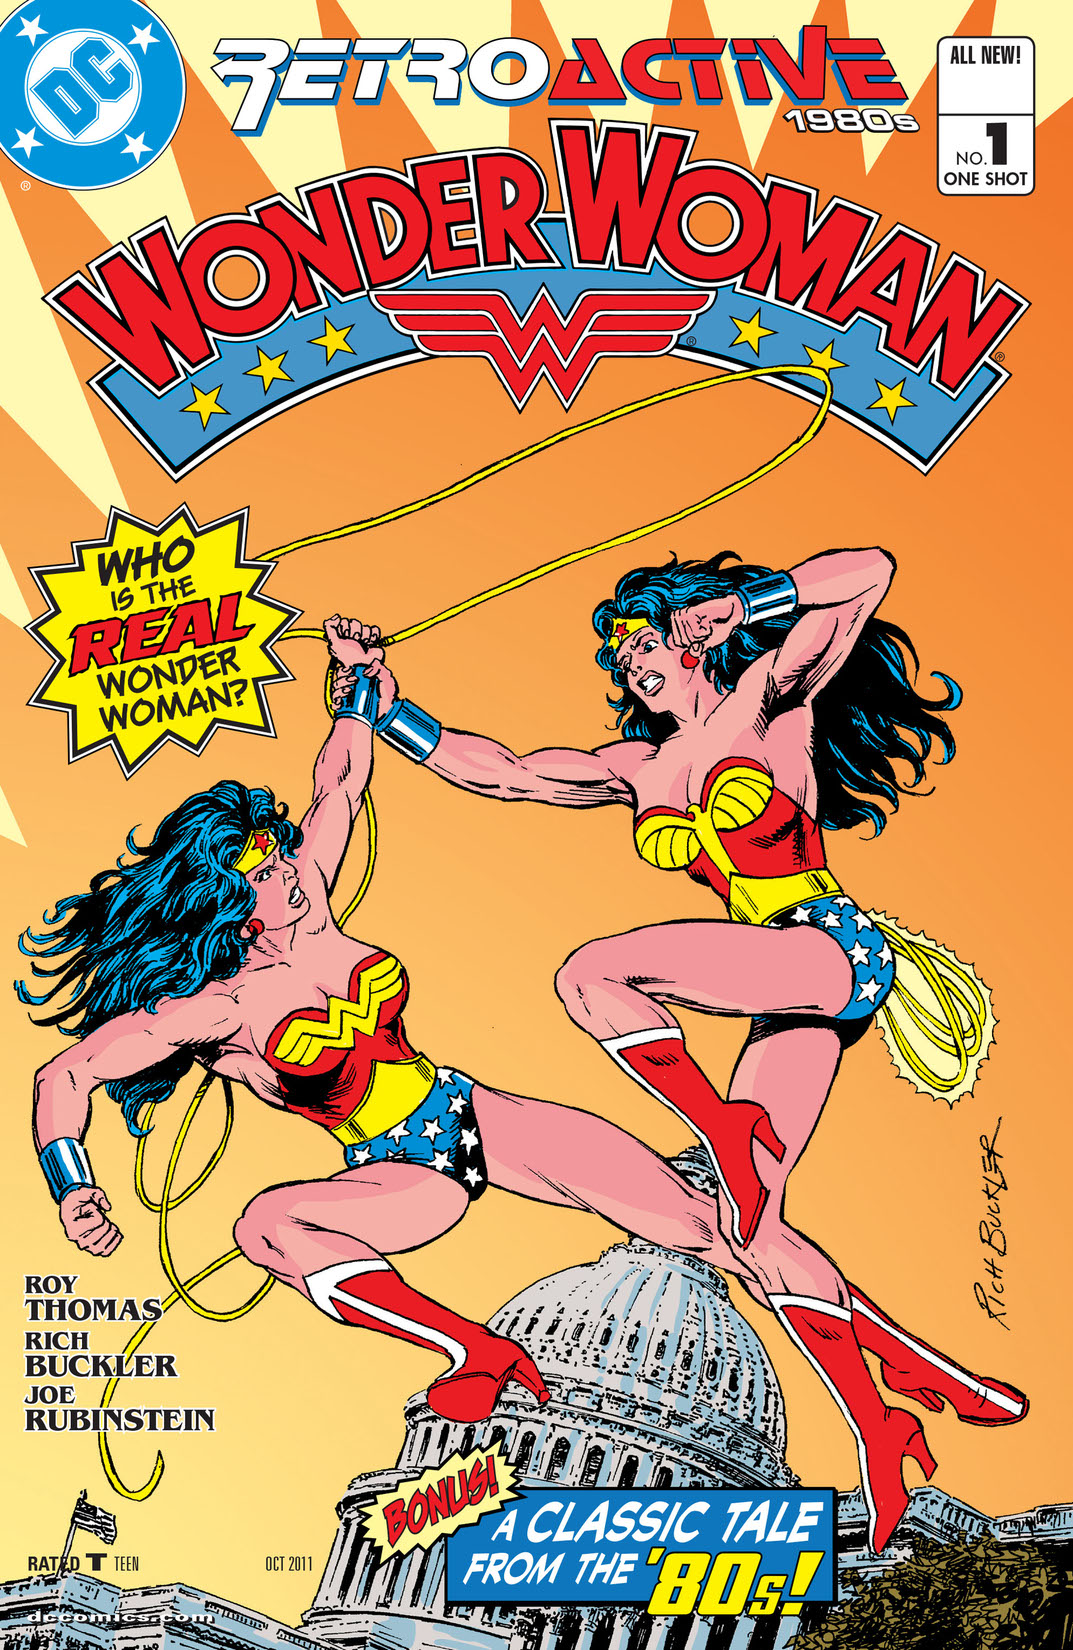 DC Retroactive: Wonder Woman - The '80s #1 preview images